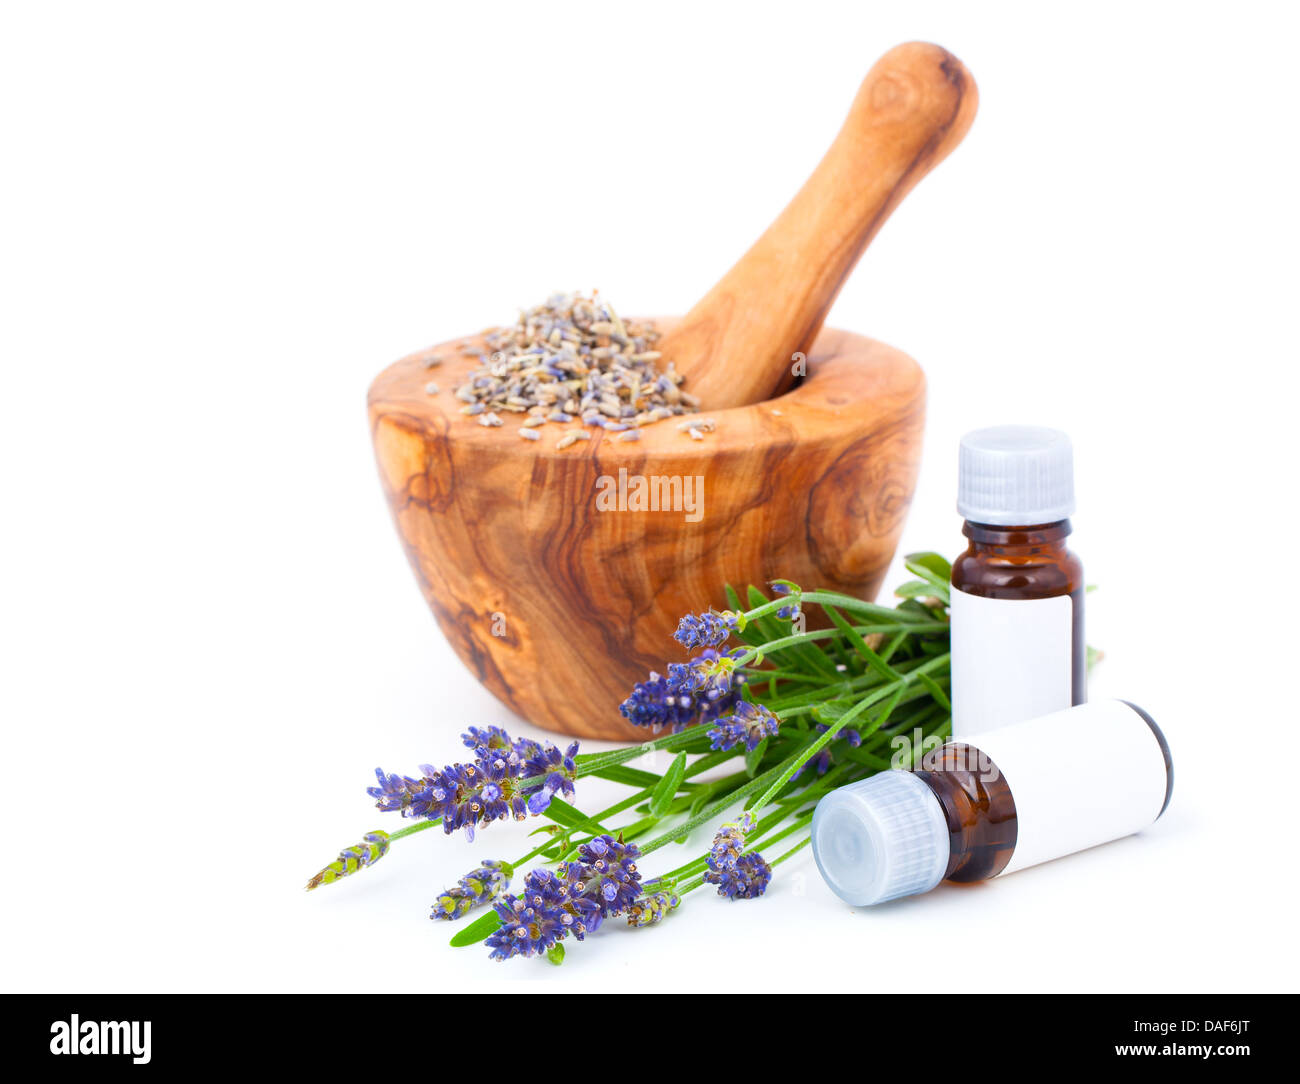 Lavender oil in a wooden bowl, over a white background. Stock Photo